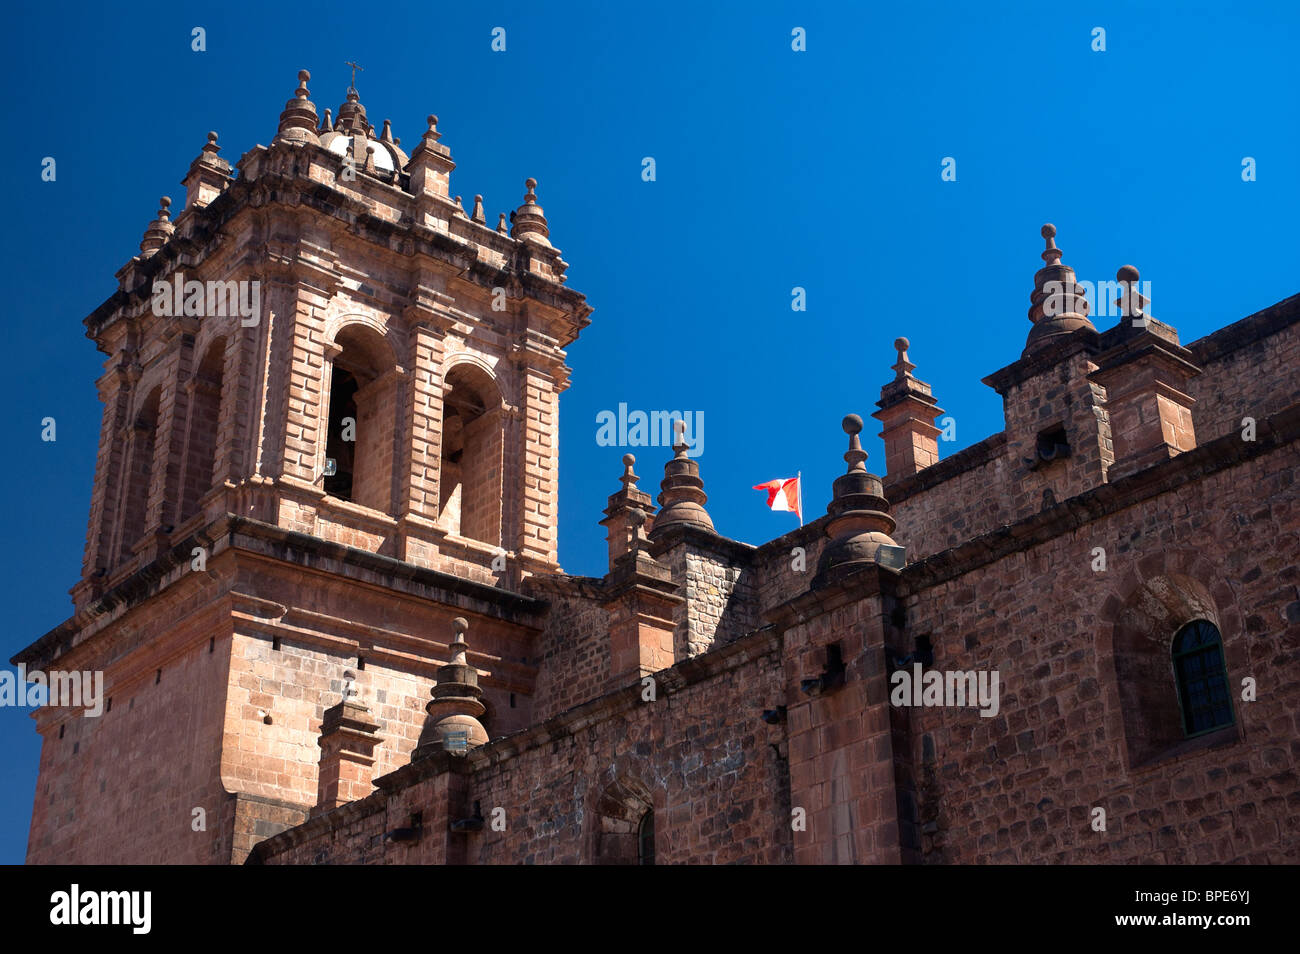 Iglesia de Catedral, the cathedral, dominates Plaza de Armas, or Mayors Plaza, in the center of Cusco, Peru. Stock Photo